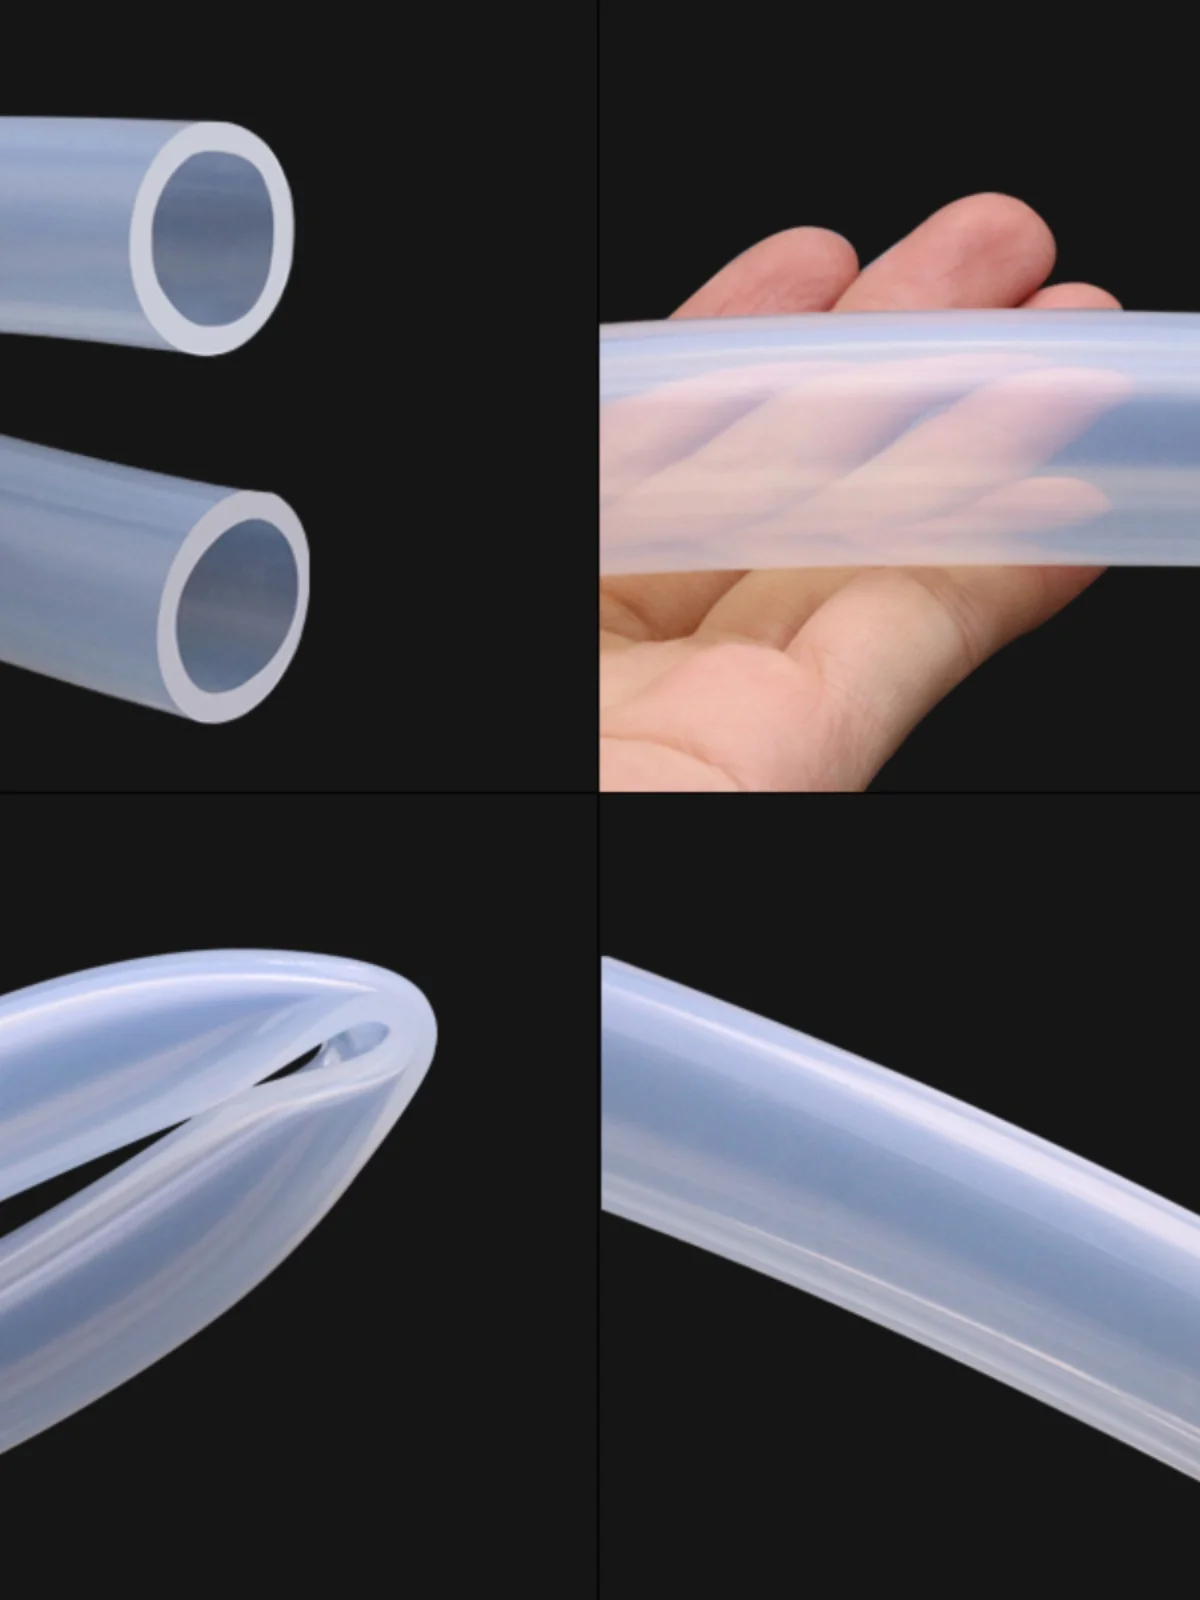 1M Food Grade Silicone Rubber Hose Transparent Flexible Silicone Tube Diameter 0.5 1 1.5 2 2.5 3 4 5 6 7 8  10  12 mm Clear Tube 1m food grade silicone rubber hose transparent flexible silicone tube diameter 1 2 3 4 5 6 7 8 9 10 11 12 13mm clear tube